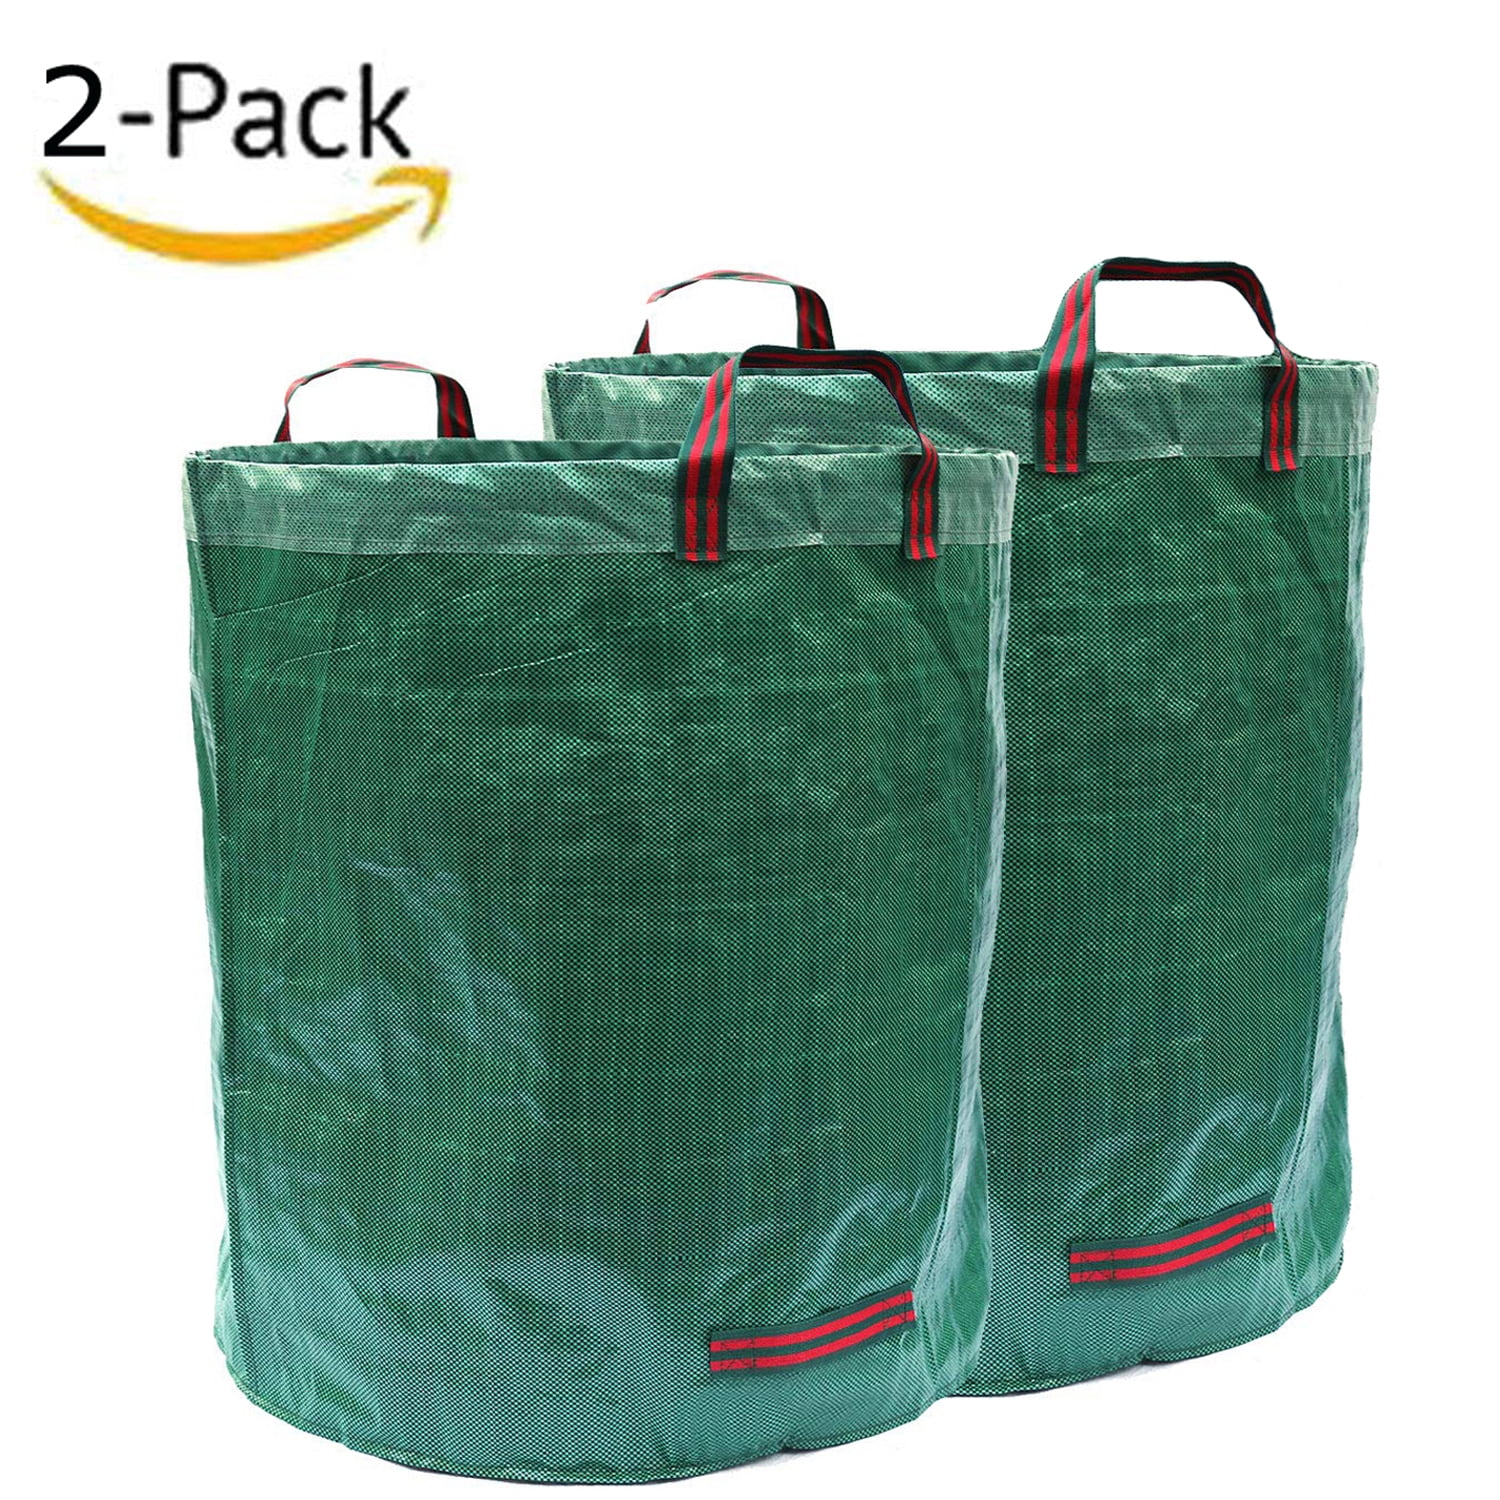 H30, D26 inches Yard Waste Bags GardenMate 6-Pack 72 Gallons Reusable Garden Waste Bags